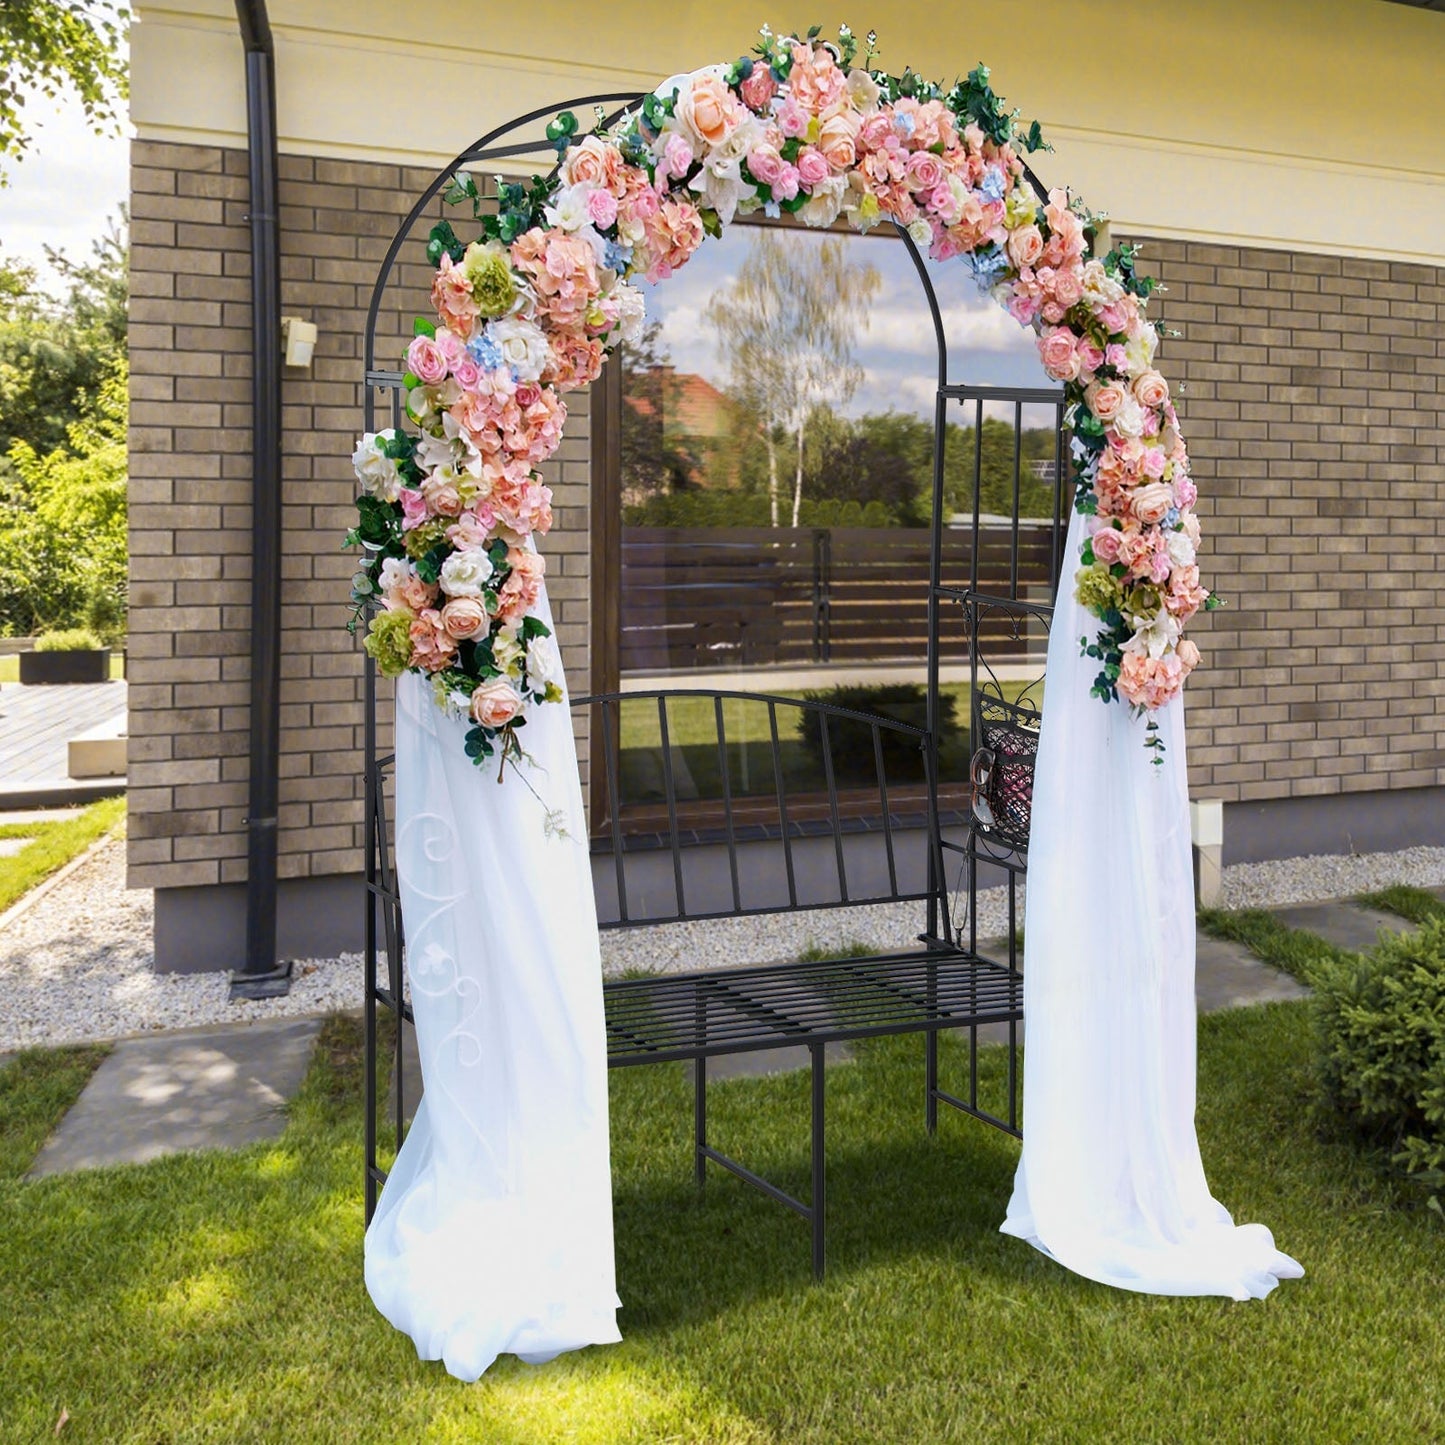 Outdoor Metal Garden Arch with Bench for Climbing Plants